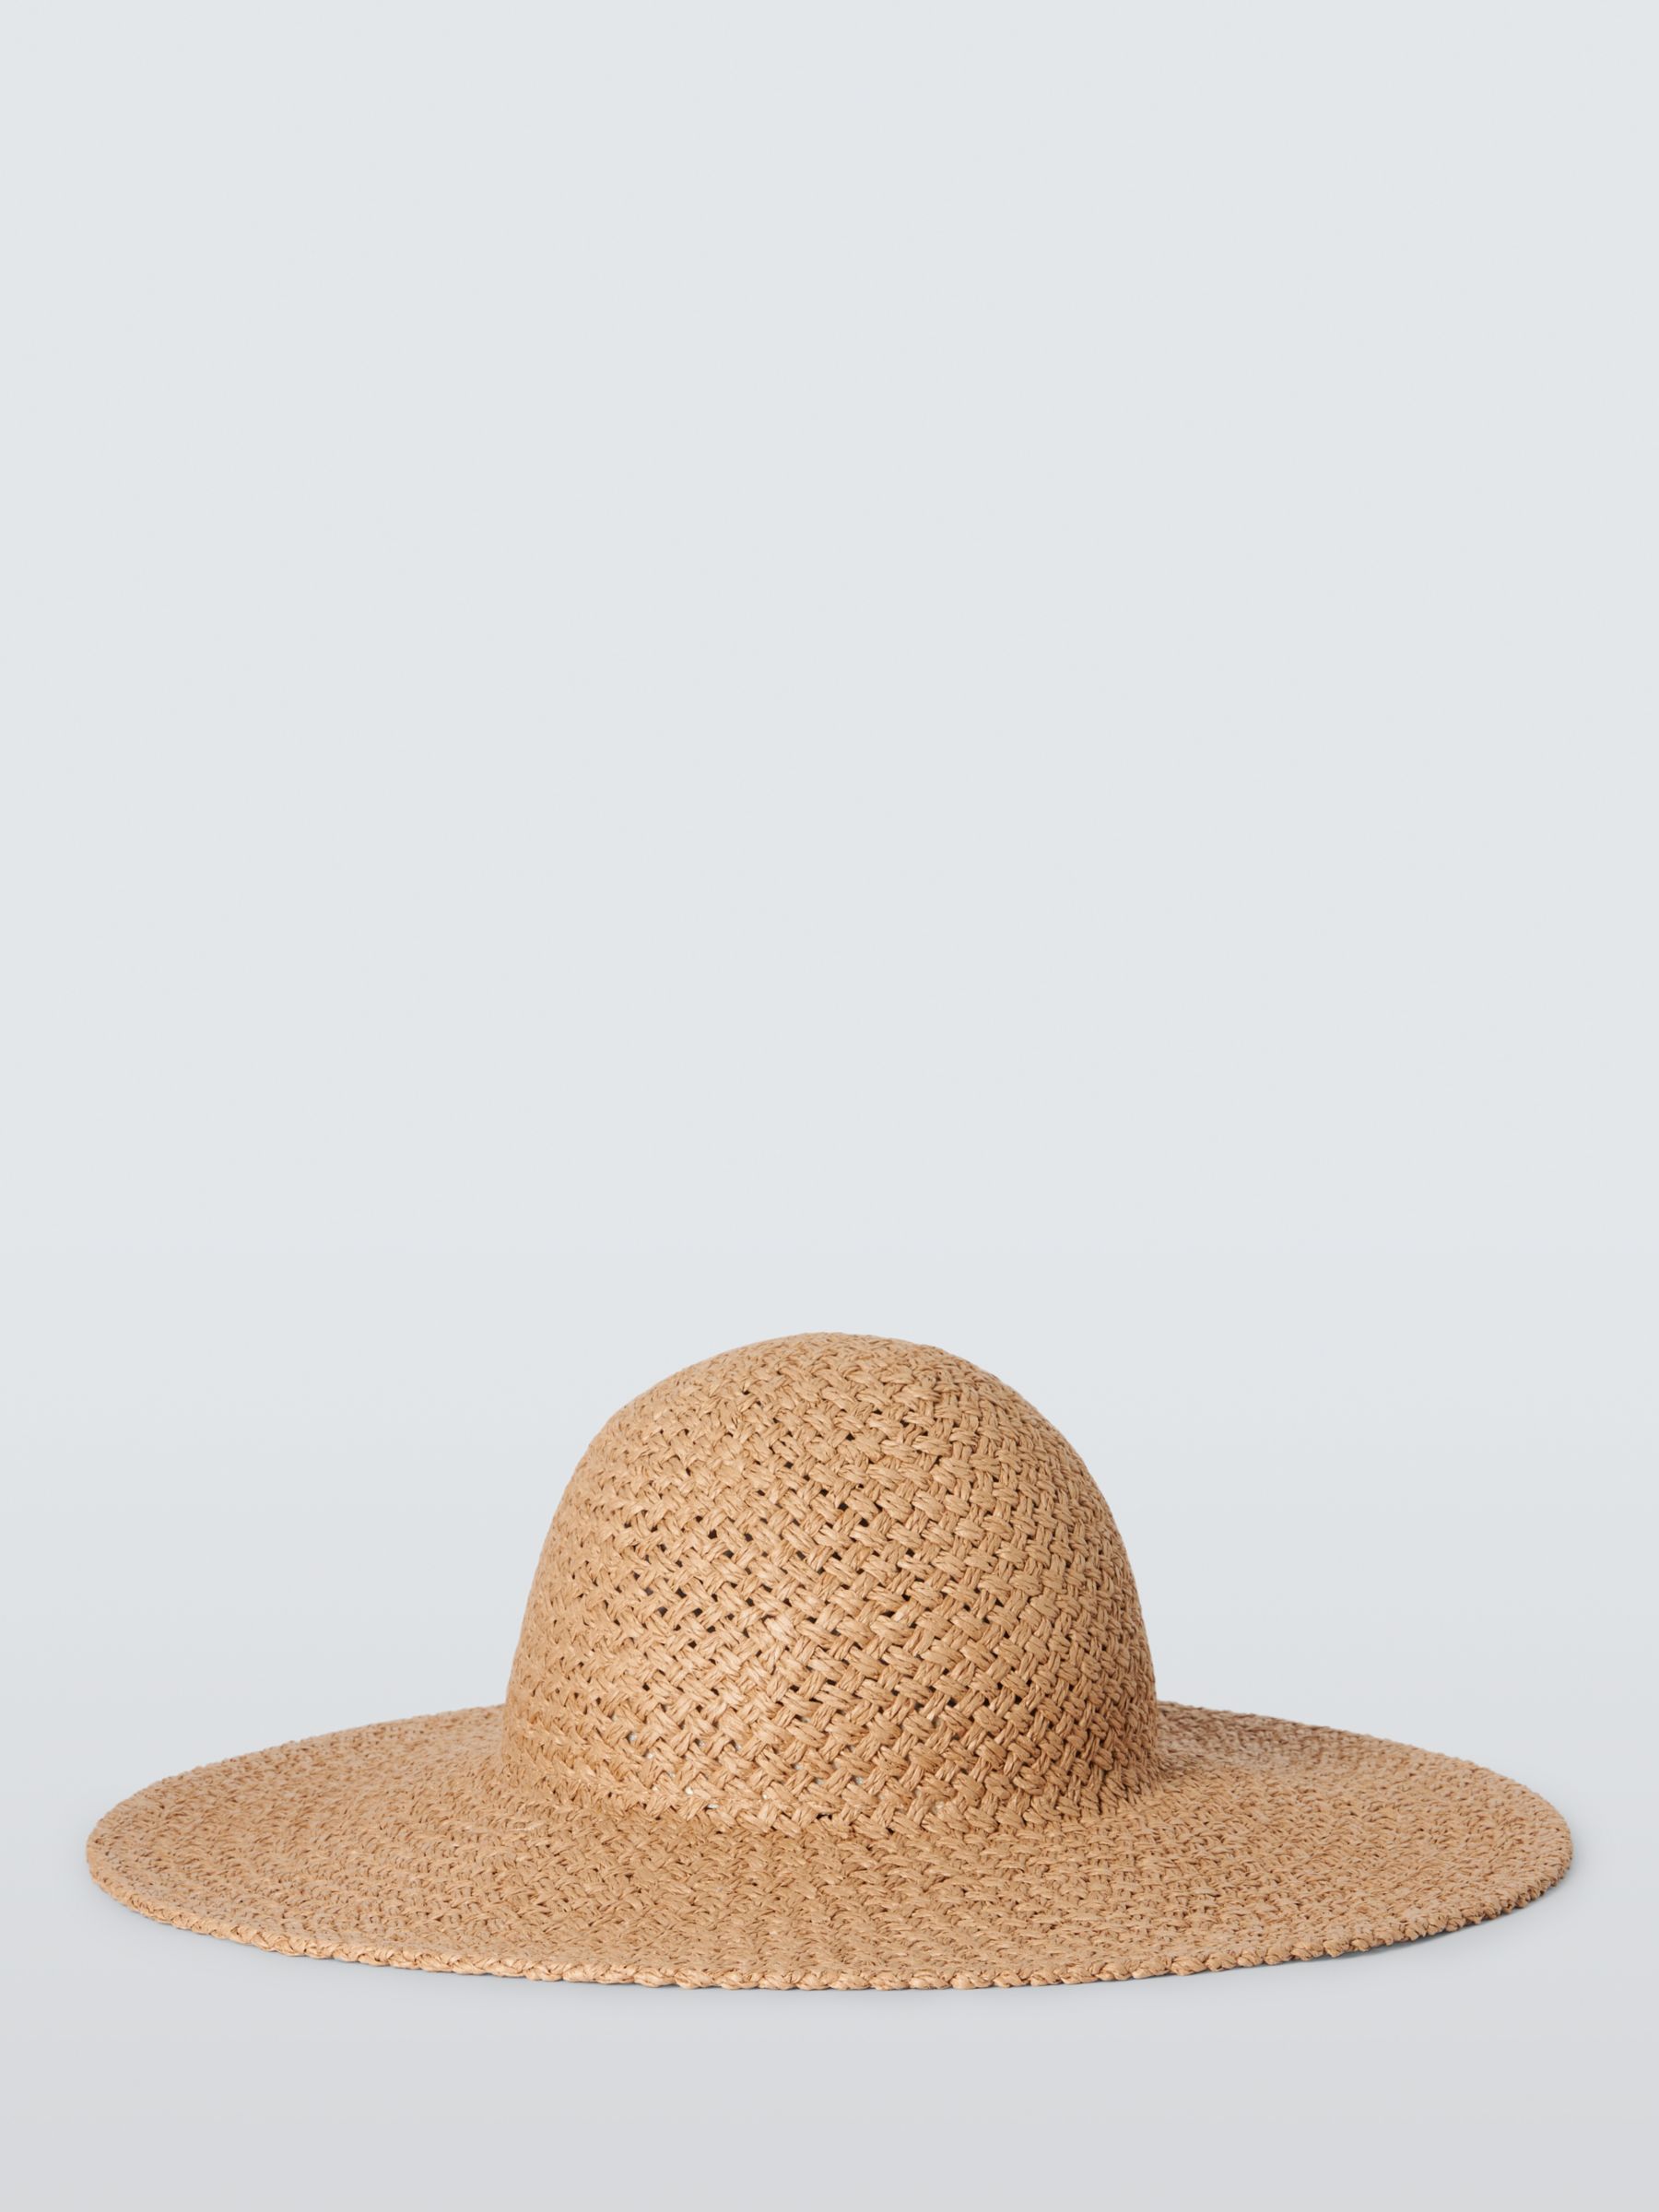 John Lewis ANYDAY Woven Floppy Hat, FSC-Certified, Natural